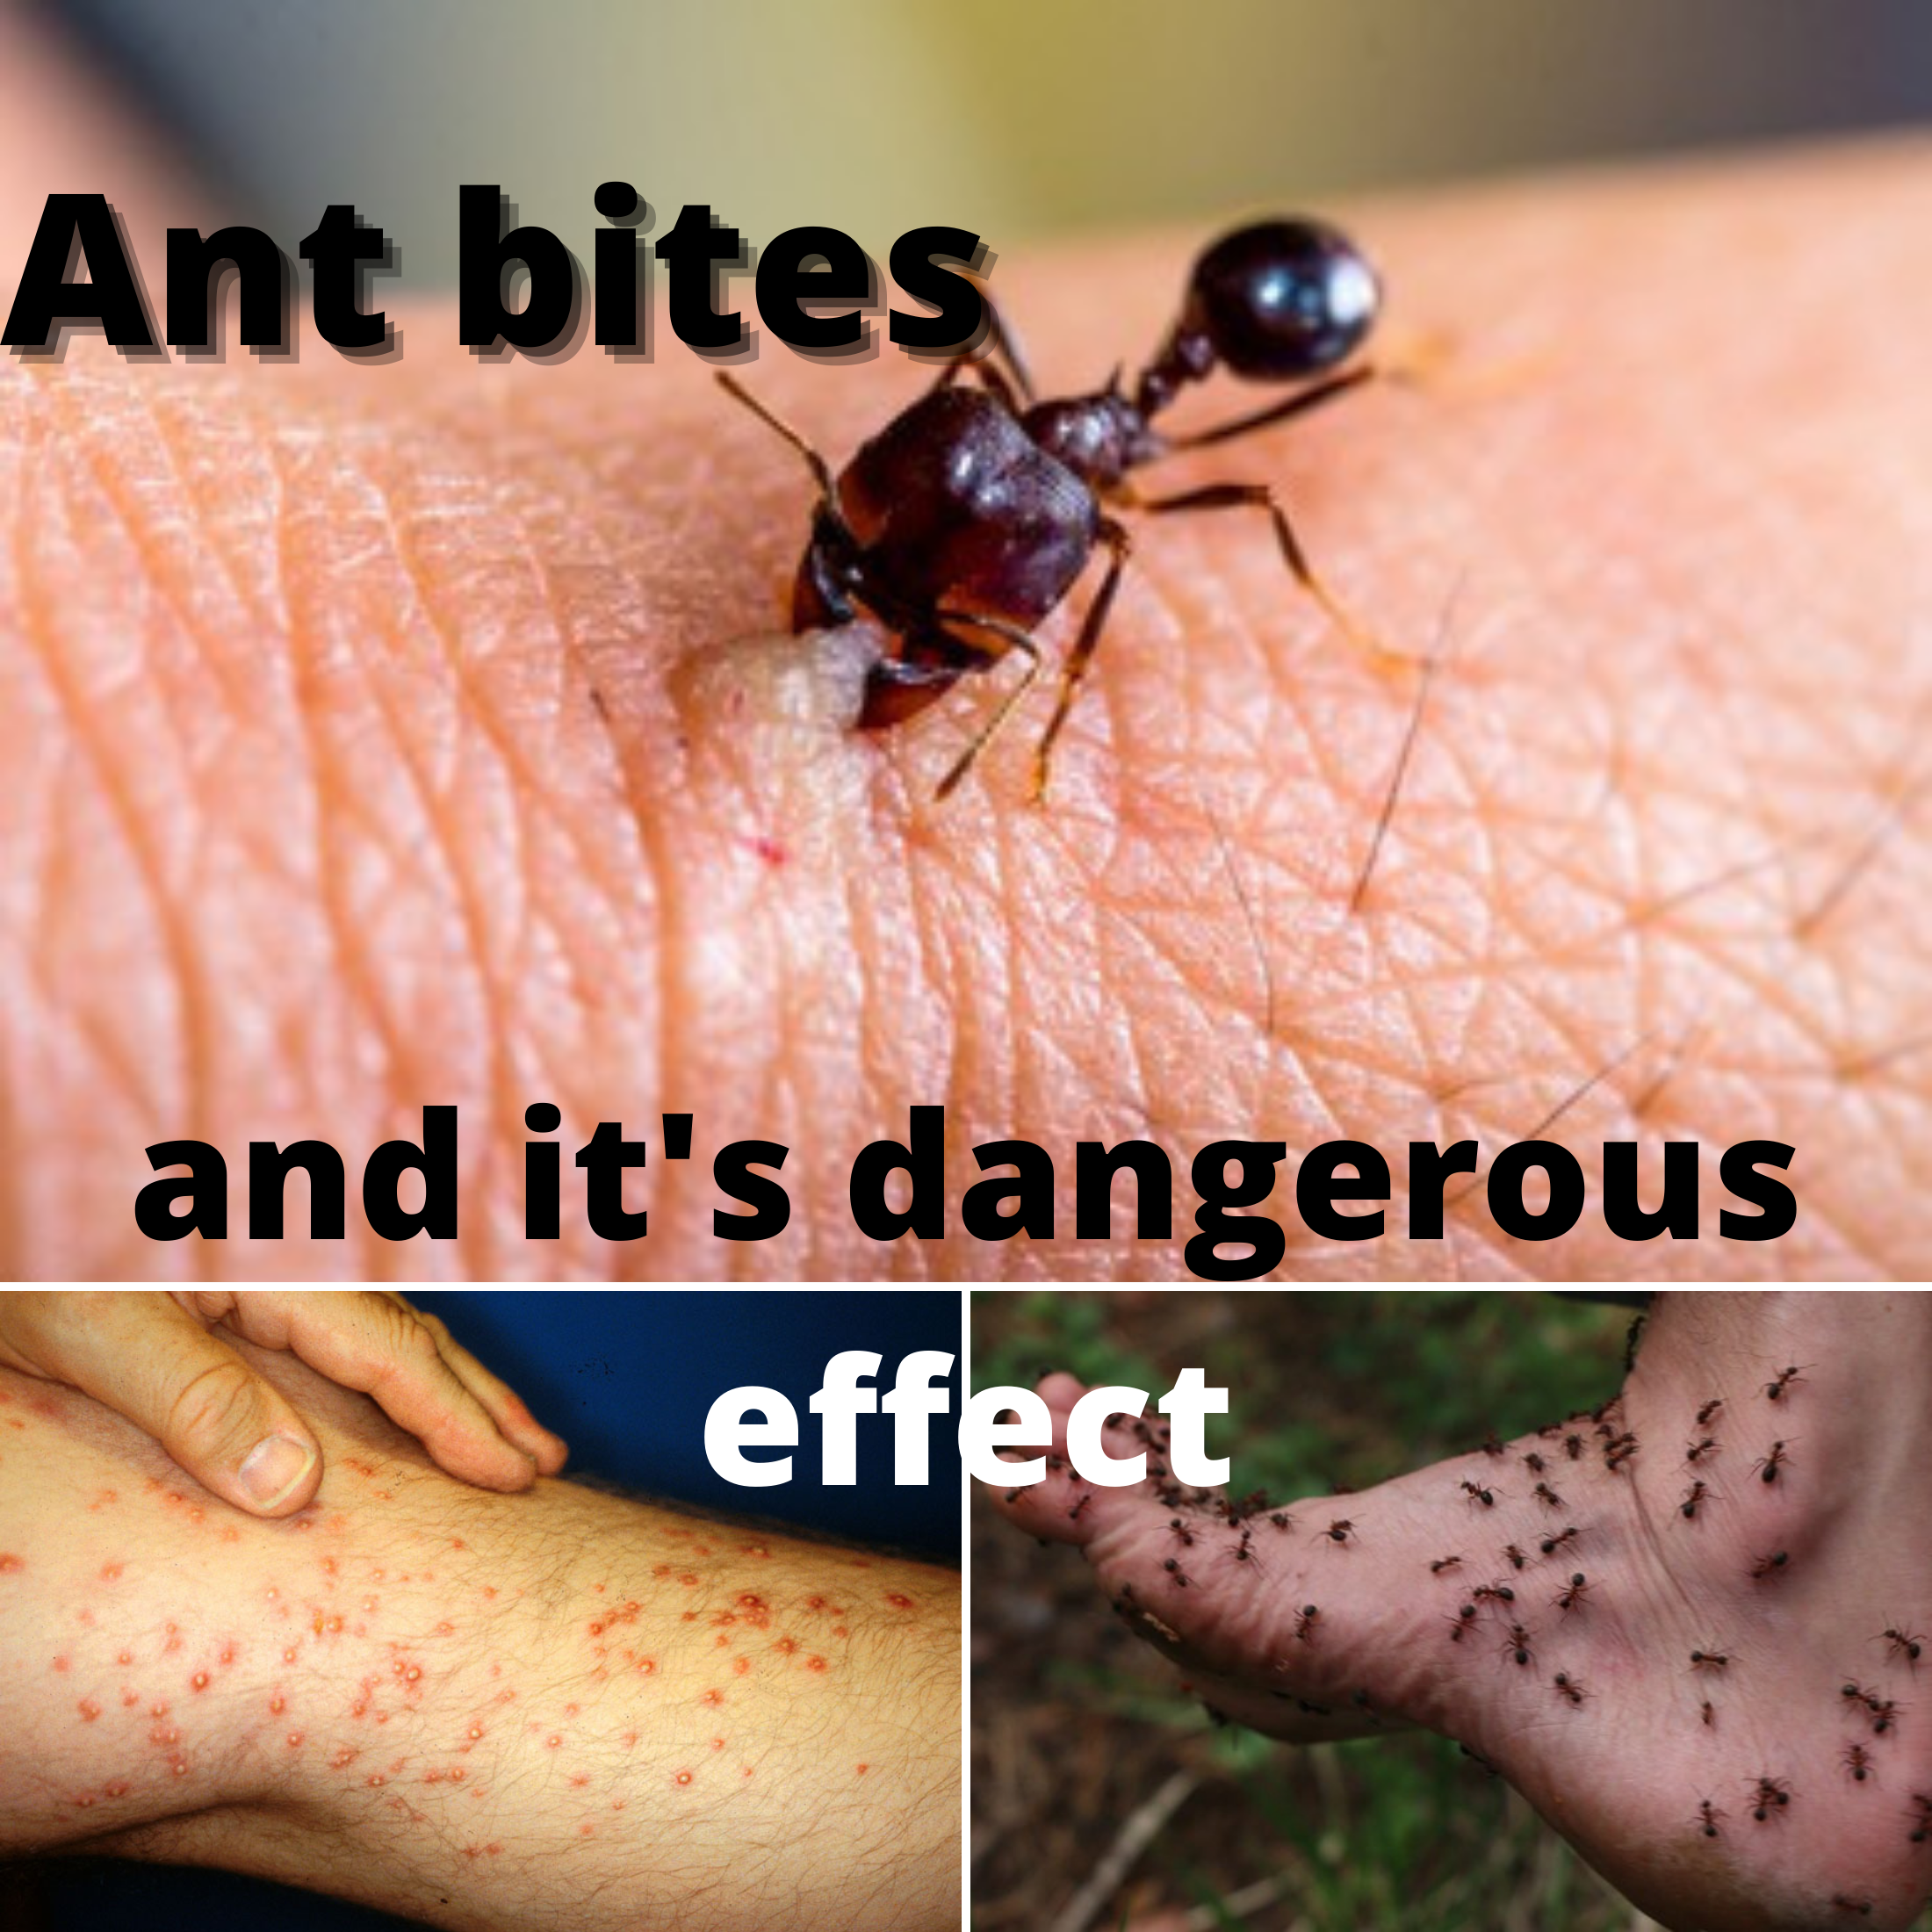 What should we do when an ant bites?